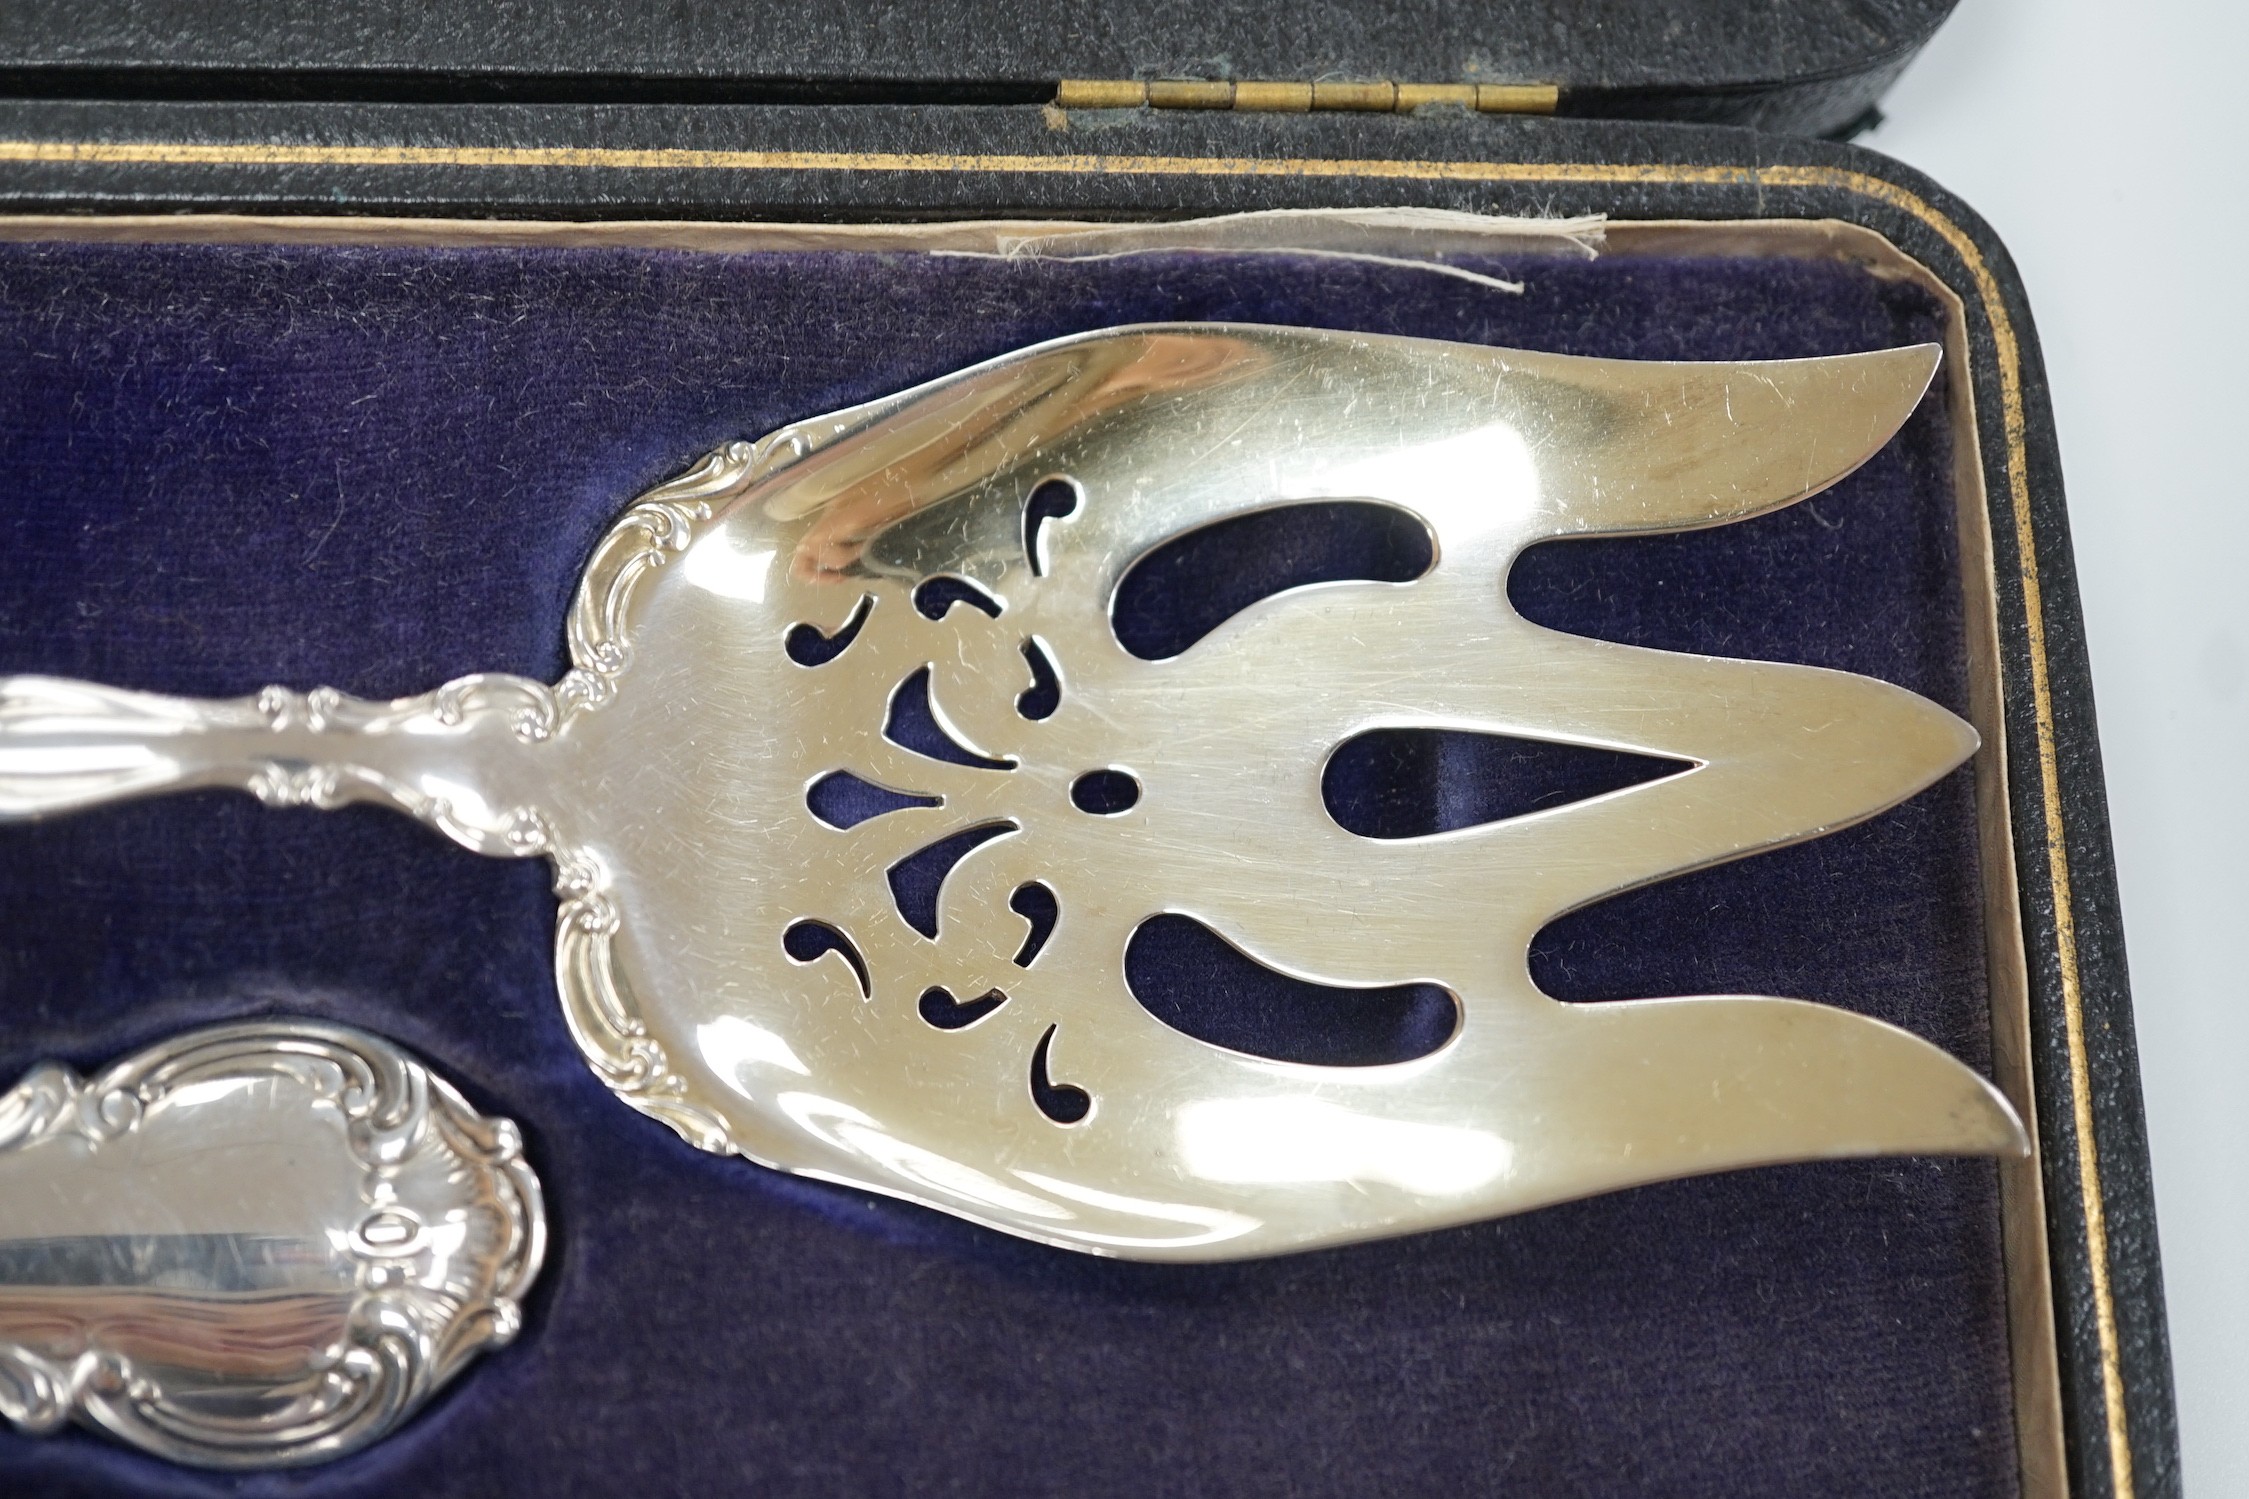 A cased pair of American sterling silver fruit servers, spoon 21.7cm, 4.4oz.